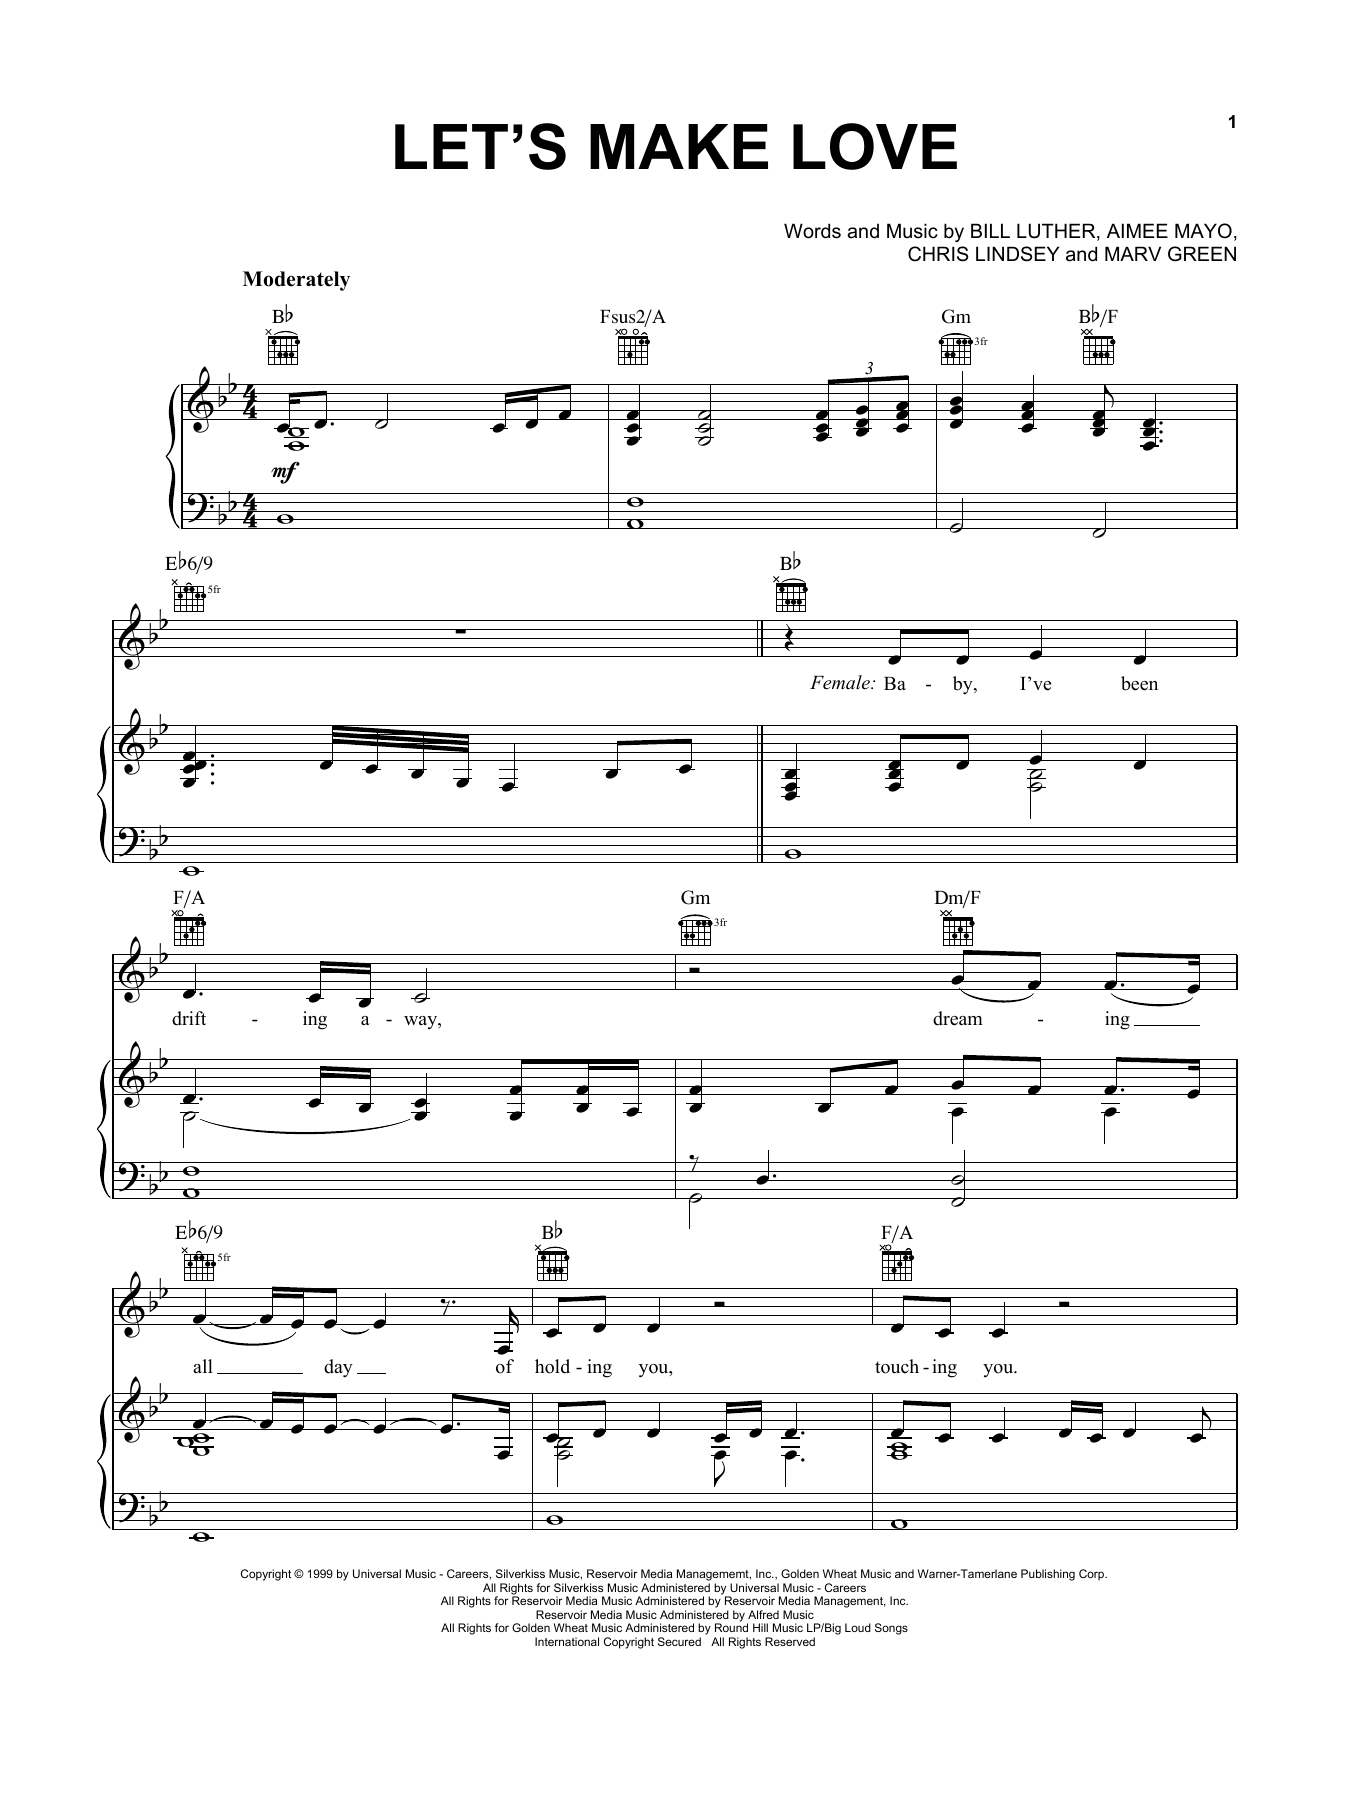 Download Faith Hill with Tim McGraw Let's Make Love Sheet Music